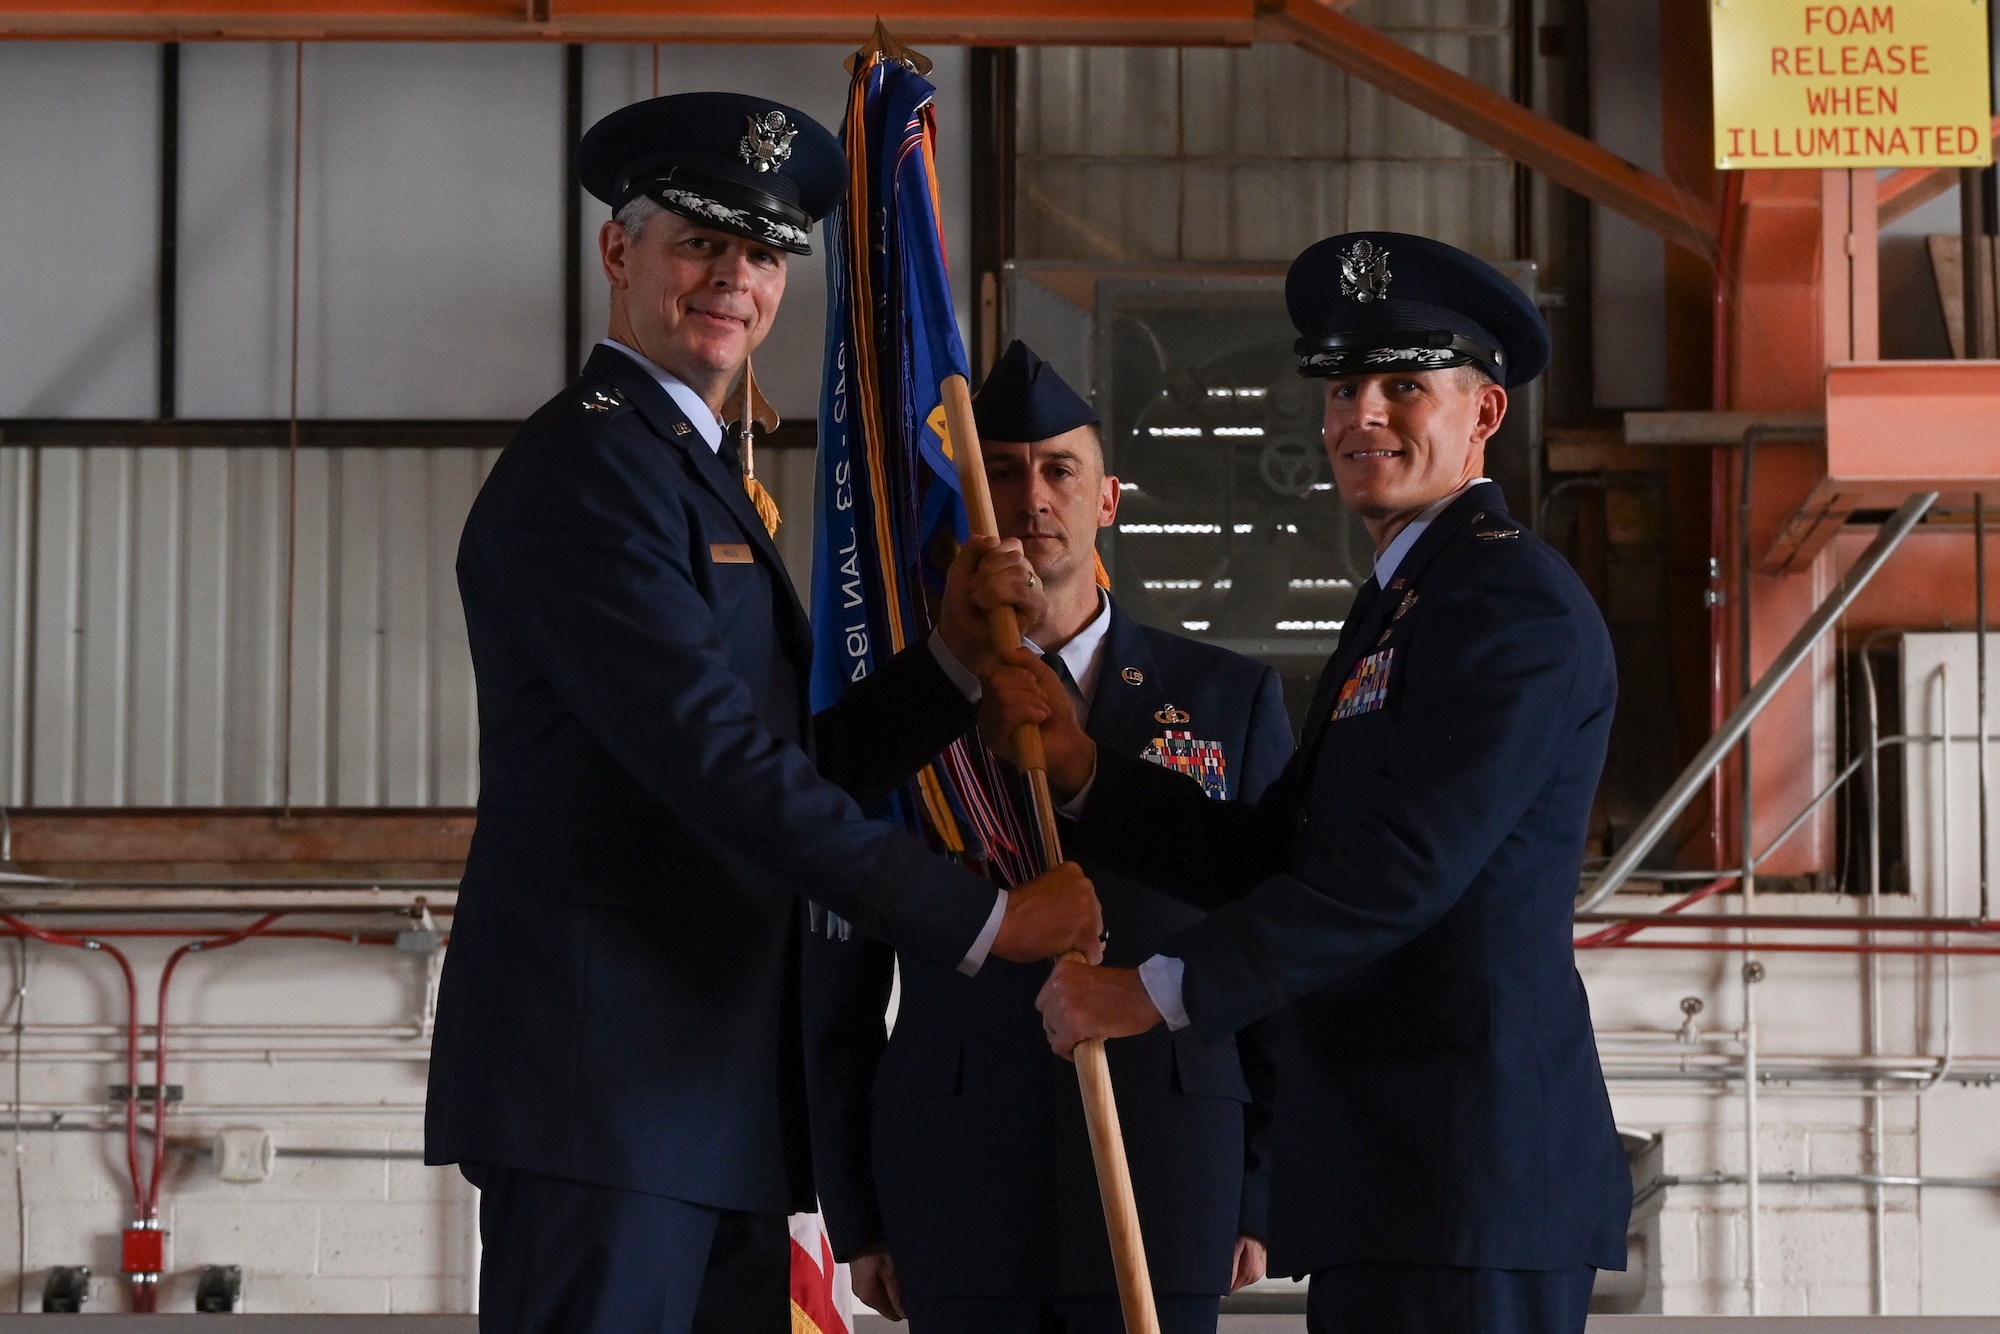 Col. Justin B. Spears accepts command of the 49th Wing from Maj. Gen. Craig D. Wills, 19th Air Force commander, during a change of command ceremony, June 17, 2022, on Holloman Air Force Base, New Mexico. Spears previously served as the commander of the 14th Operations Group at Columbus AFB, Mississippi, before assuming his new role at Holloman. (U.S. Air Force photo by Airman 1st Class Antonio Salfran)